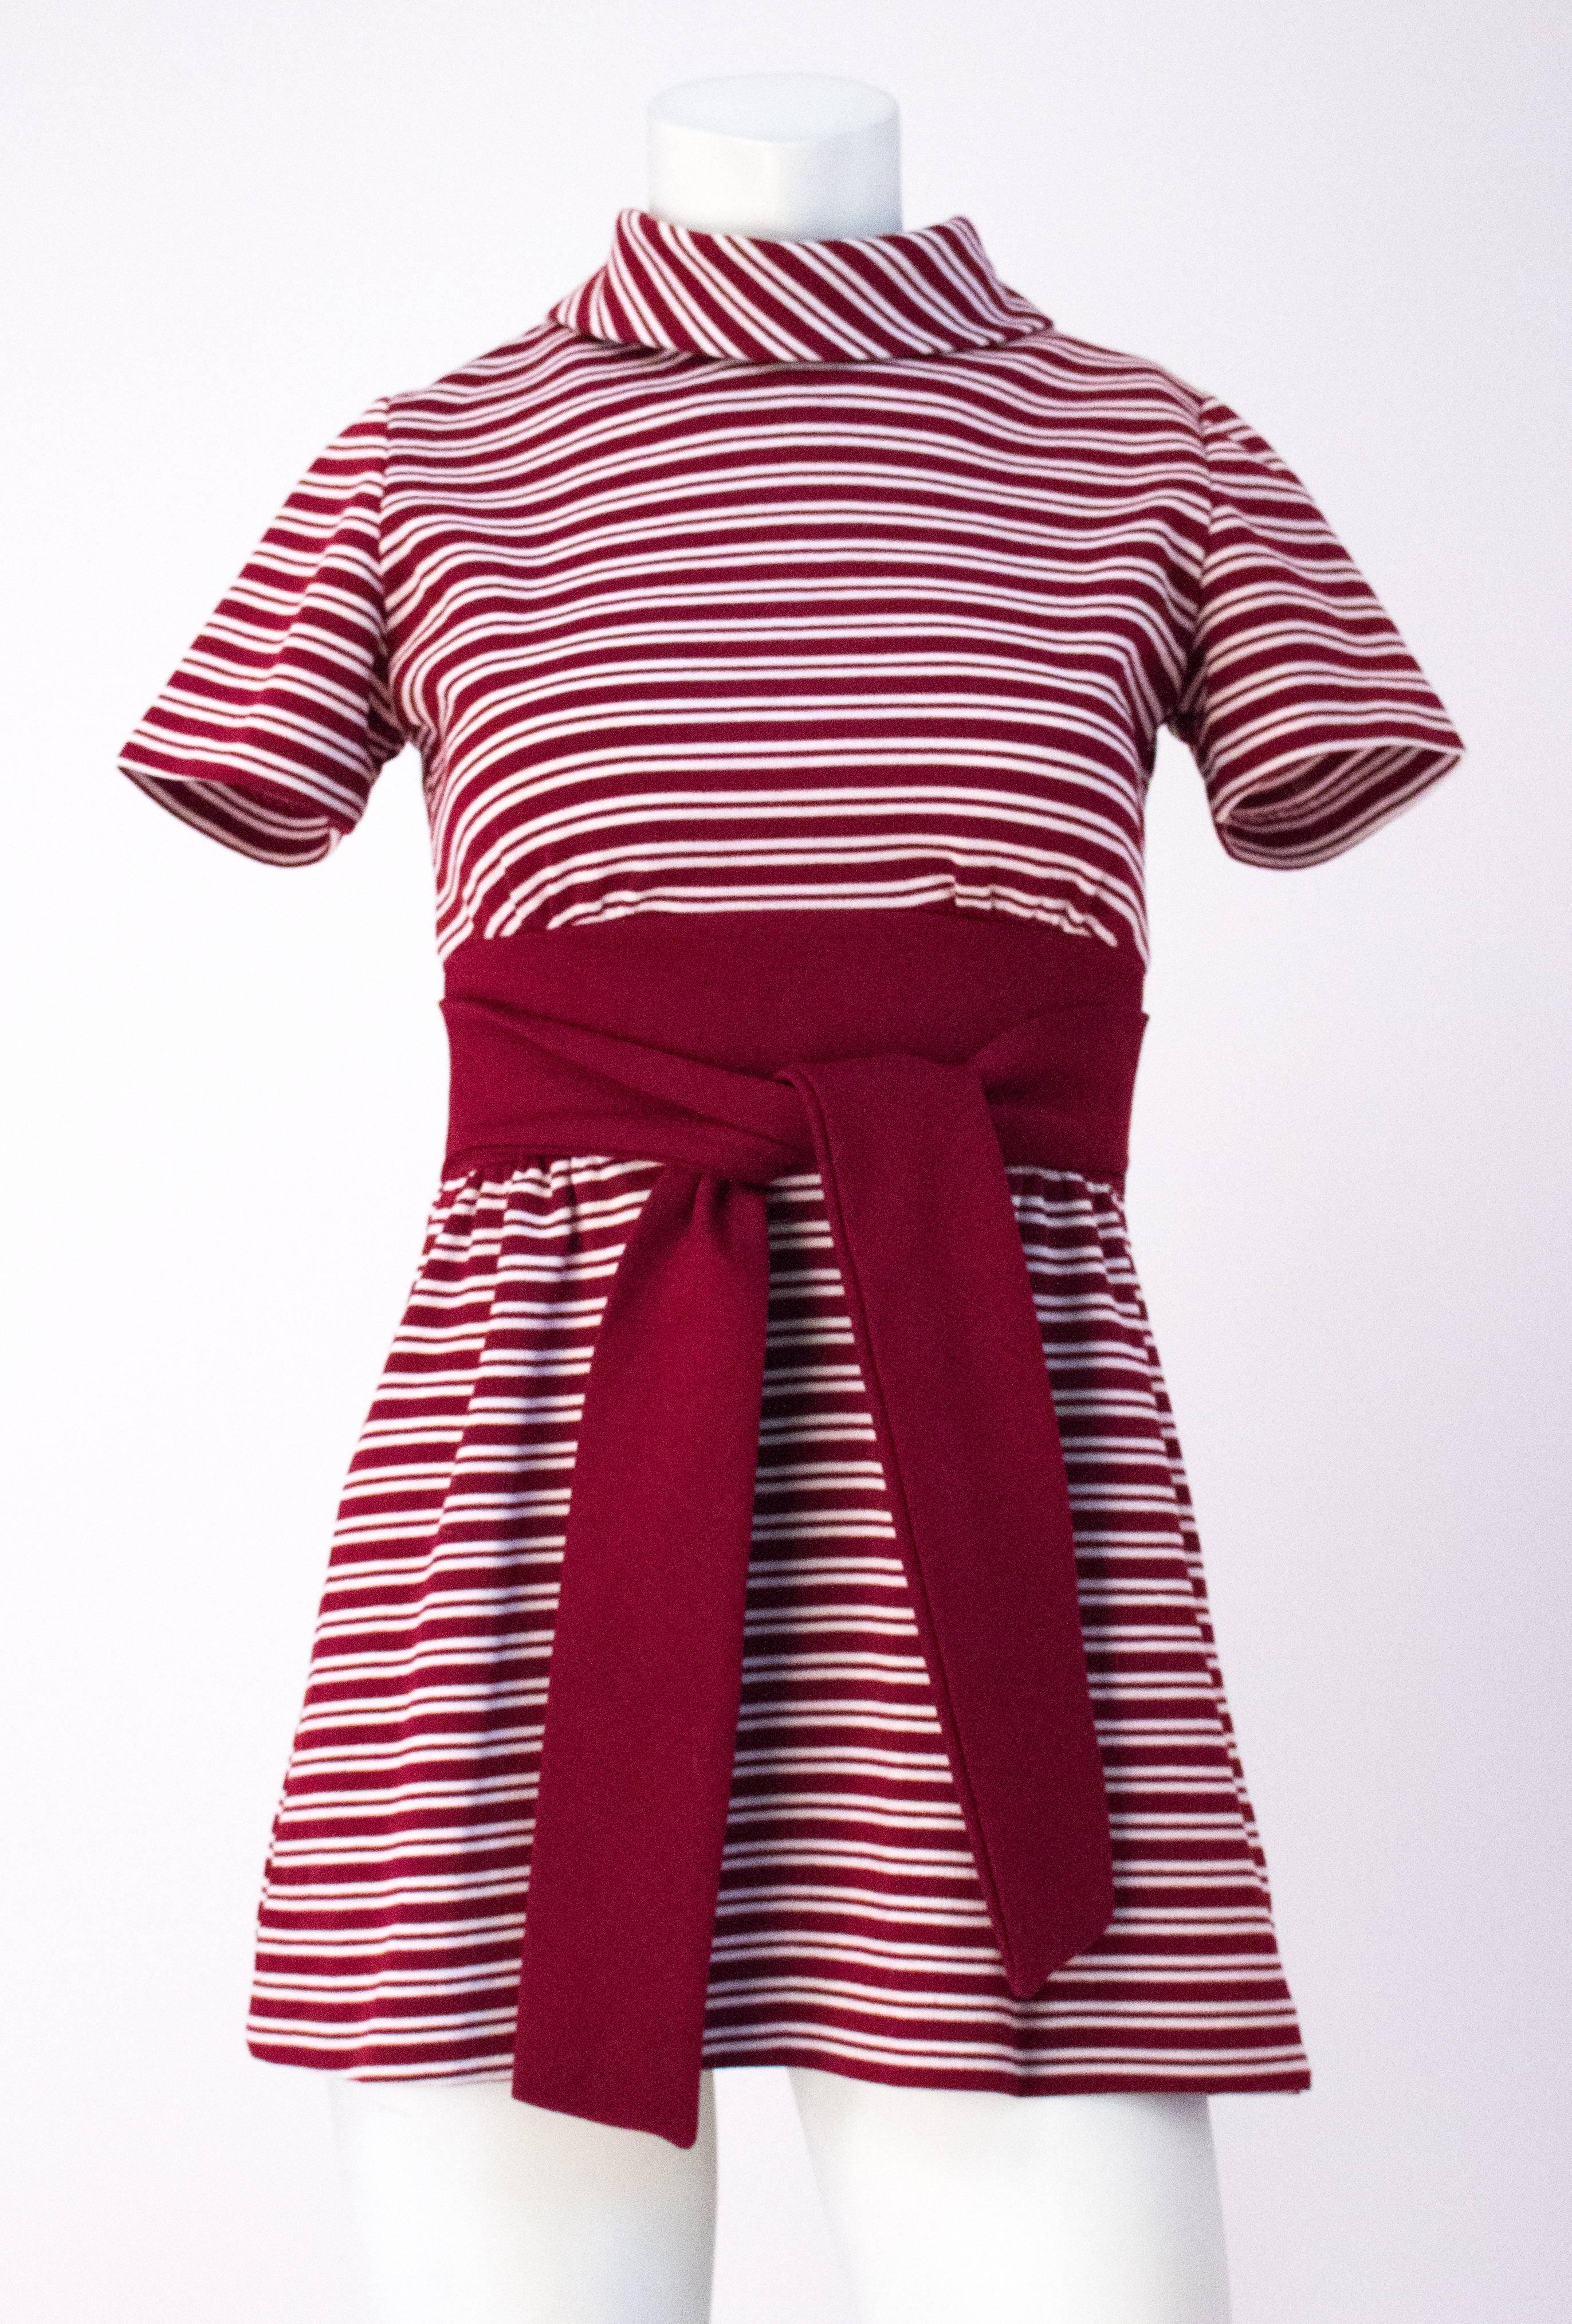 60s Red & White Stripe Mini Dress. 2 inch collar. Attached waist ties. Center back metal zipper. Two hook and eye closures on neck. 